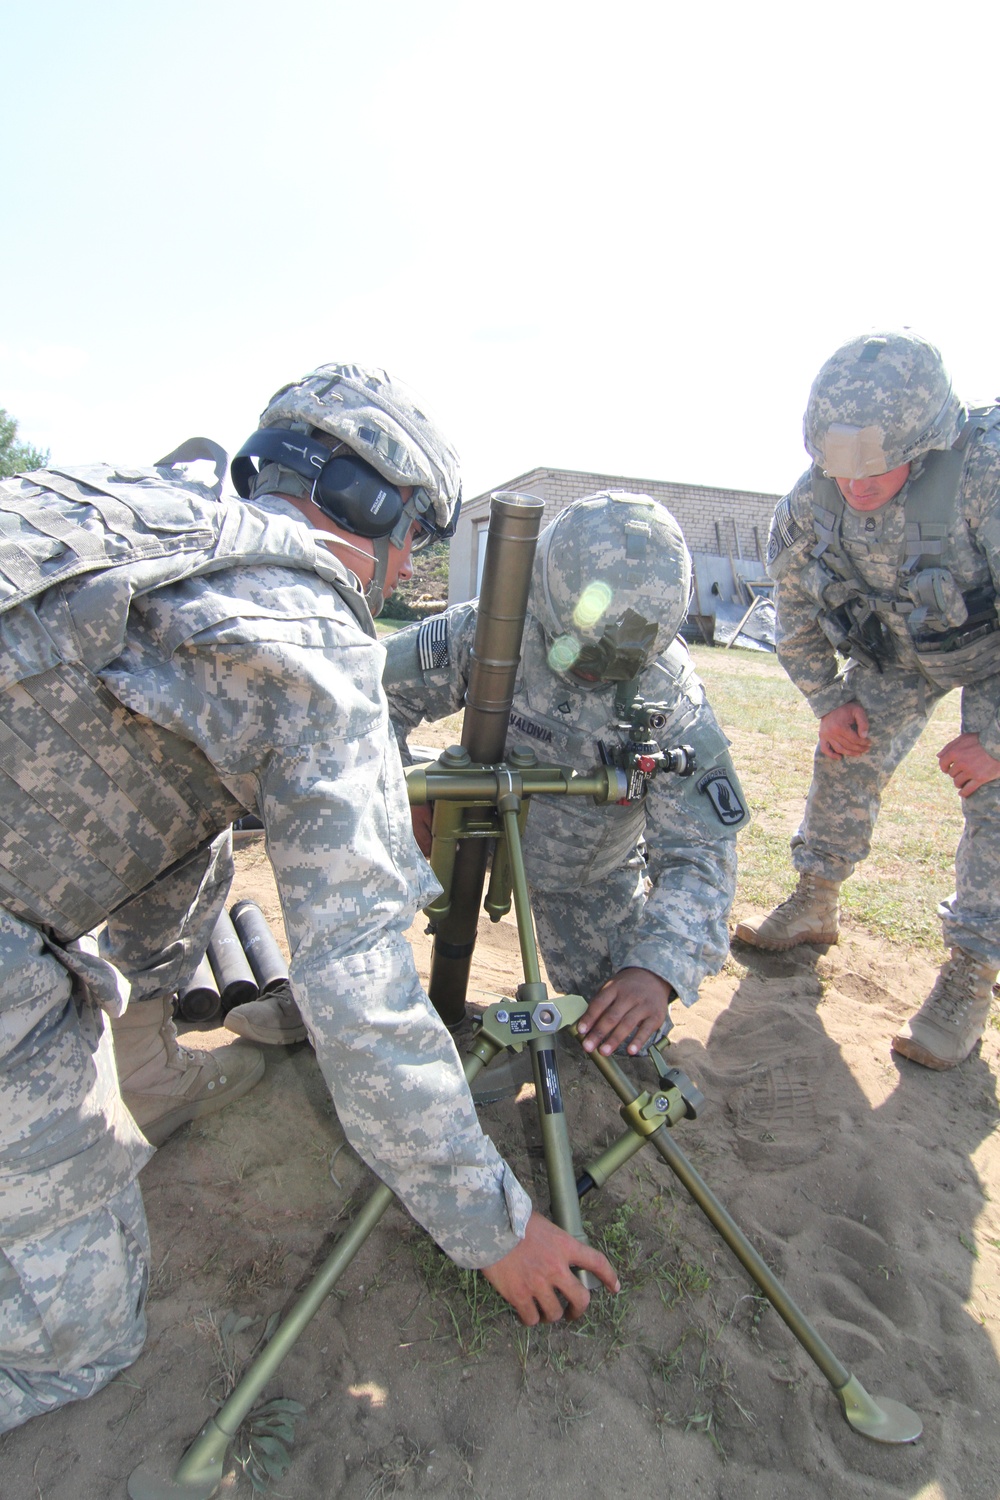 173rd paratroopers train with mortars, close air support